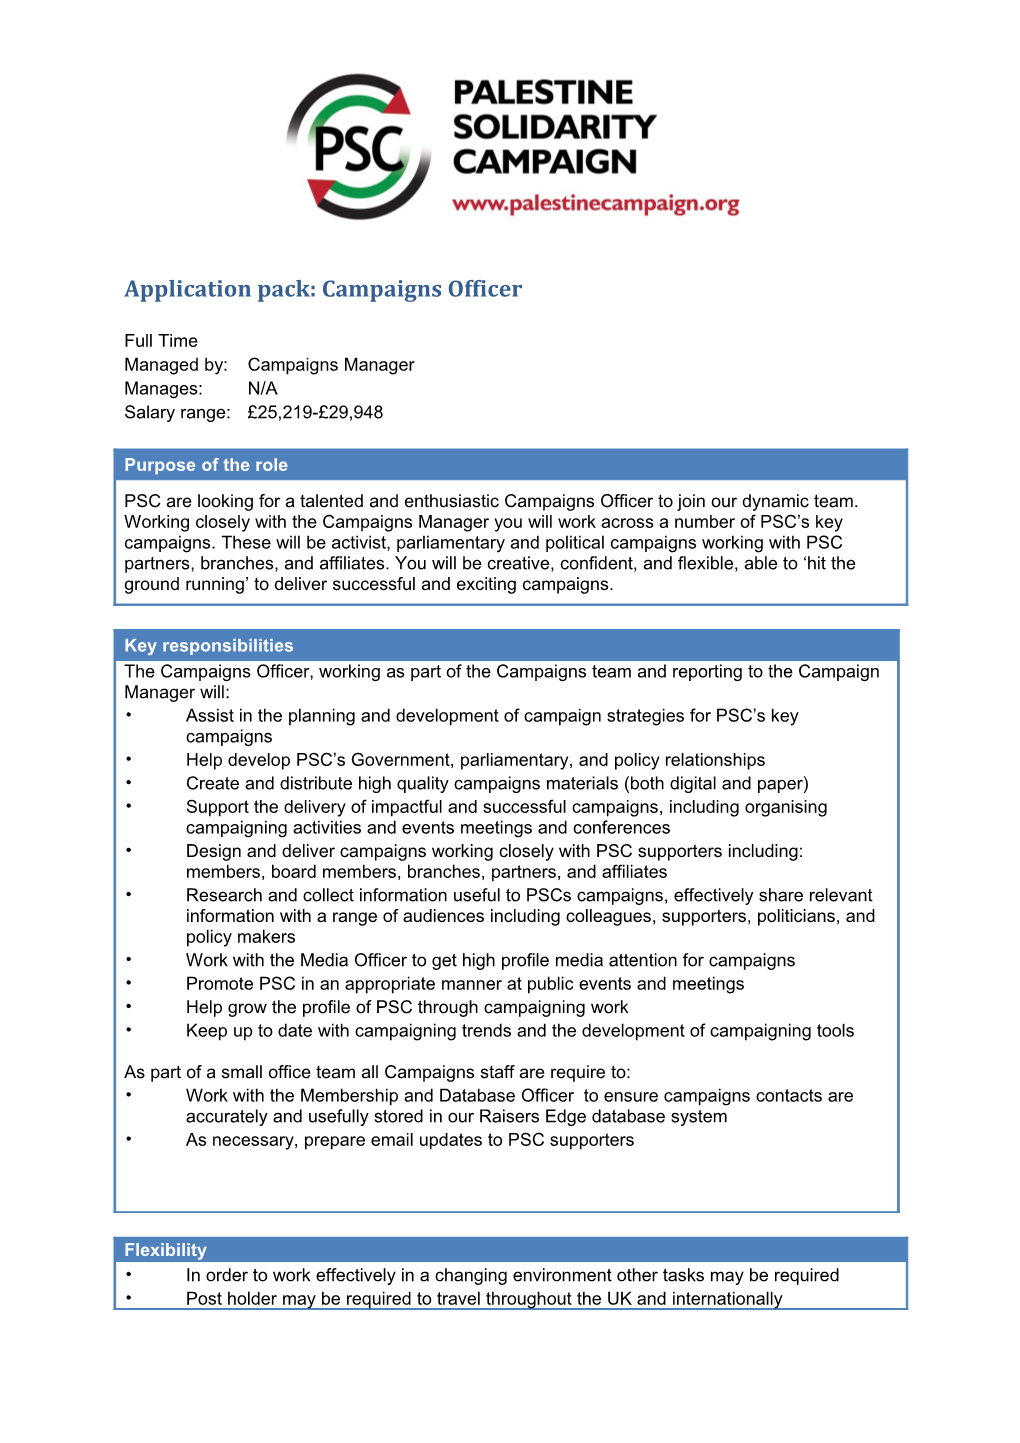 Application Pack: Campaigns Officer